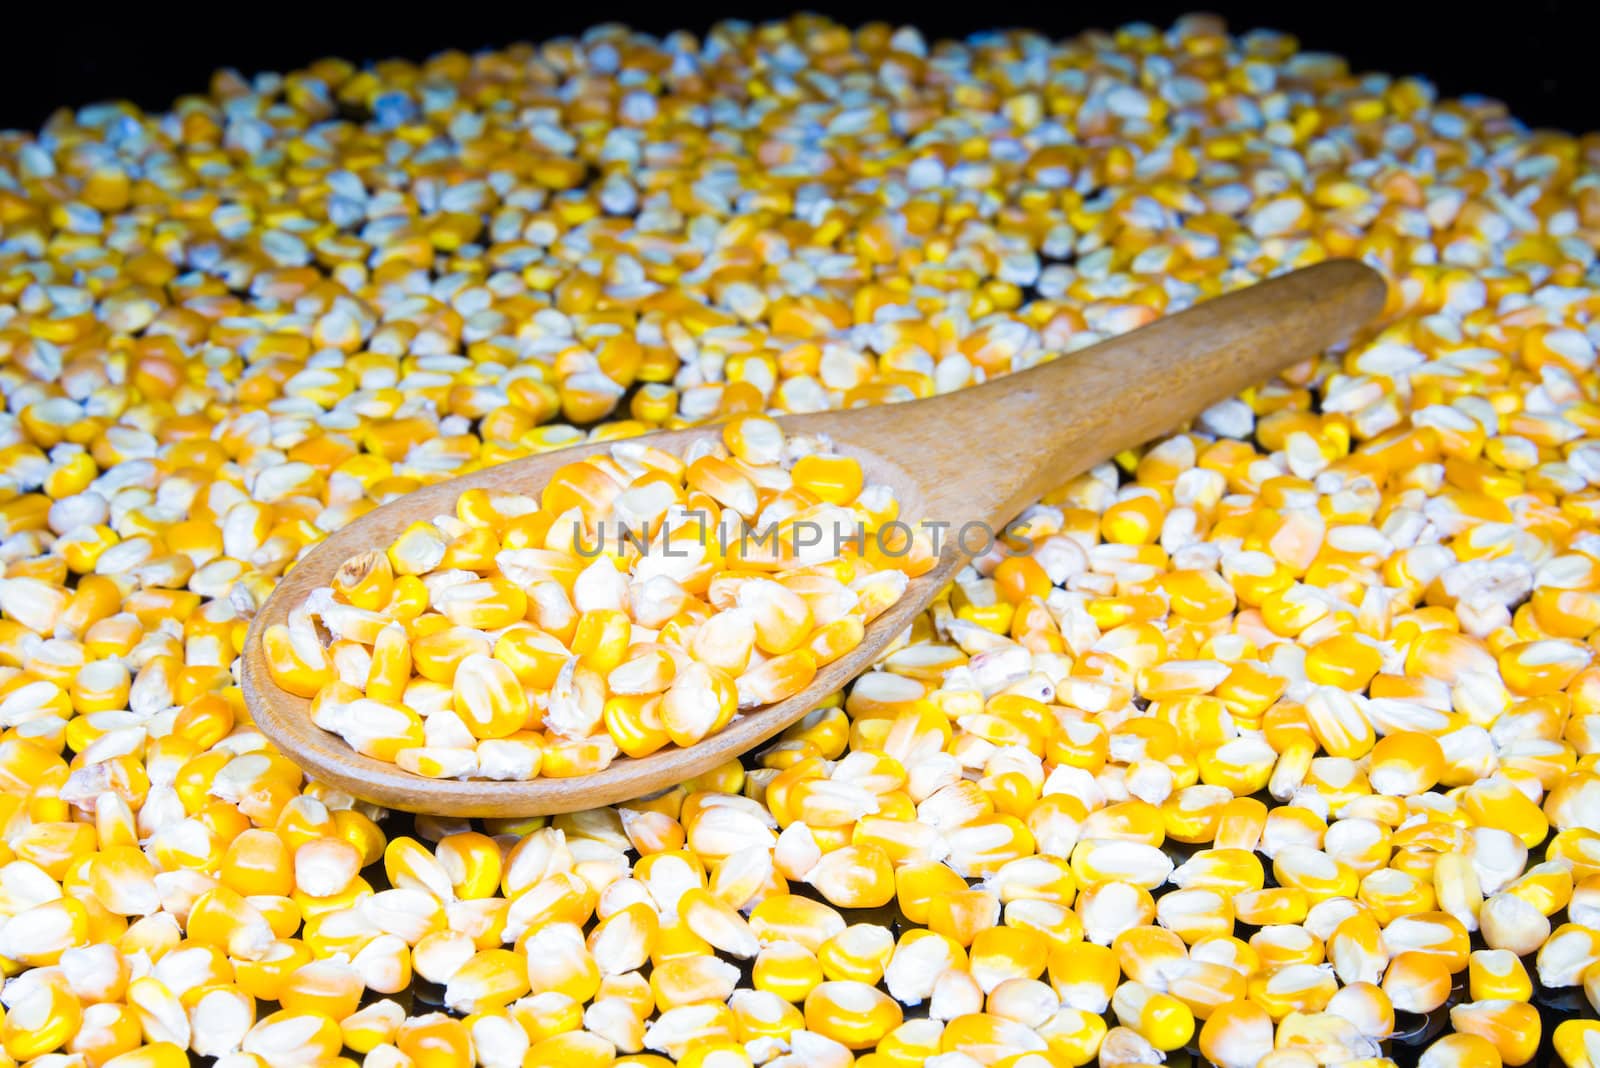 corn seeds in a wooden bowl